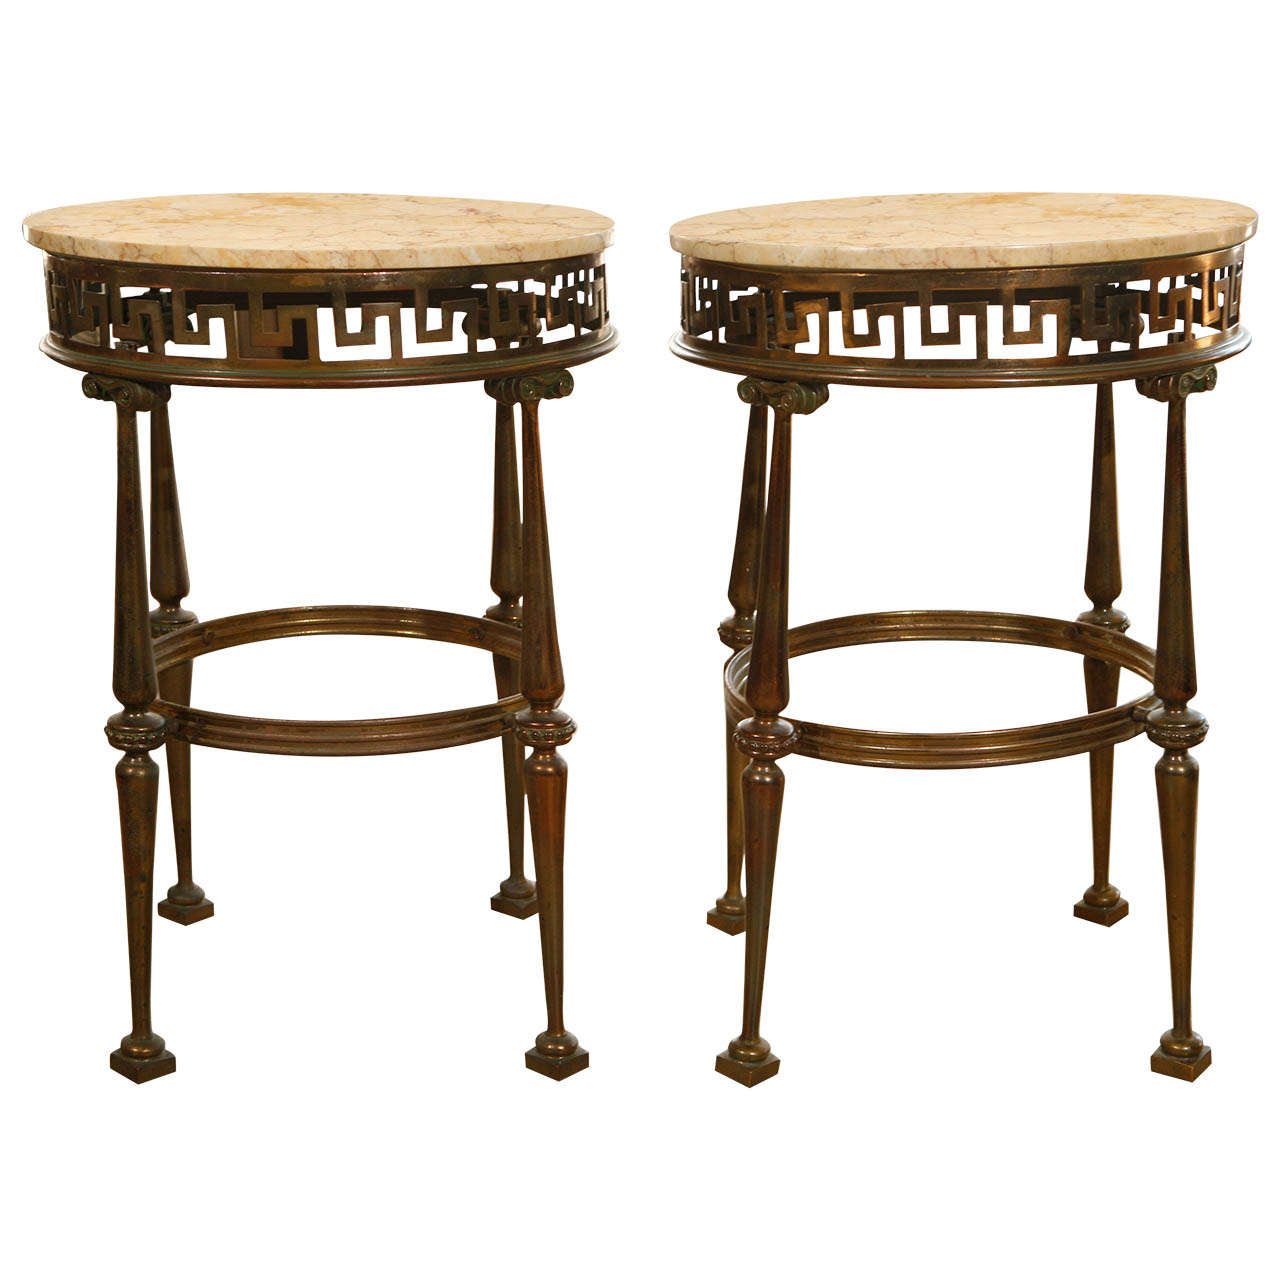 Pair Neoclassical Style Italian Brass and Marble Gueridon Tables